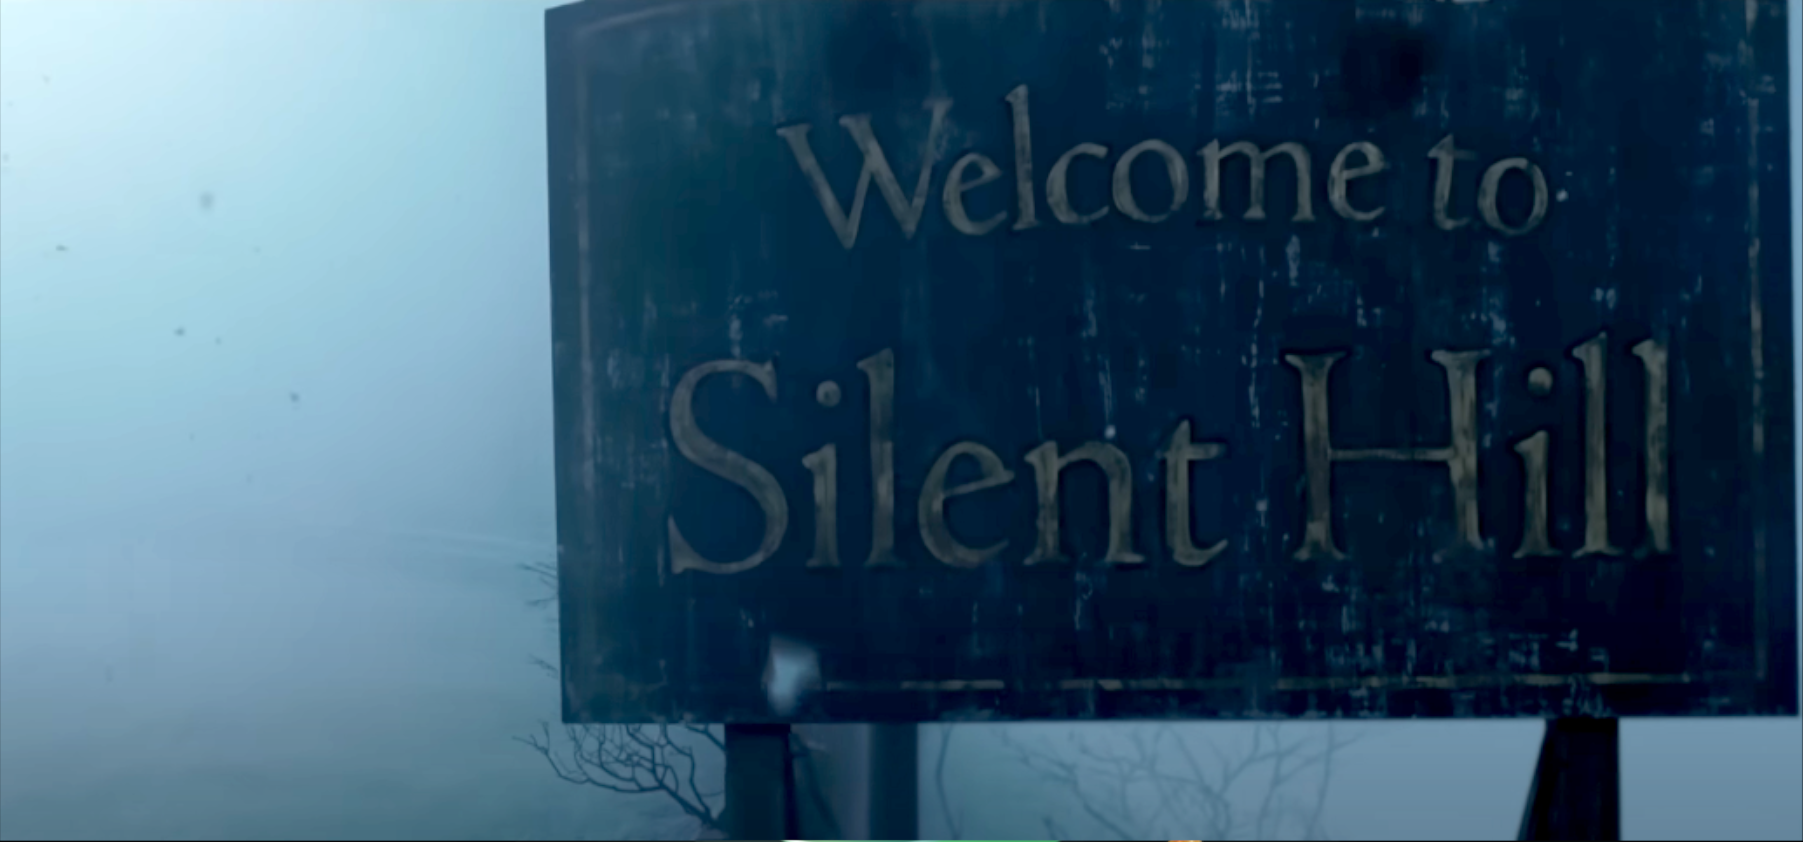 Silent Hill's return shows Konami is taking games seriously again